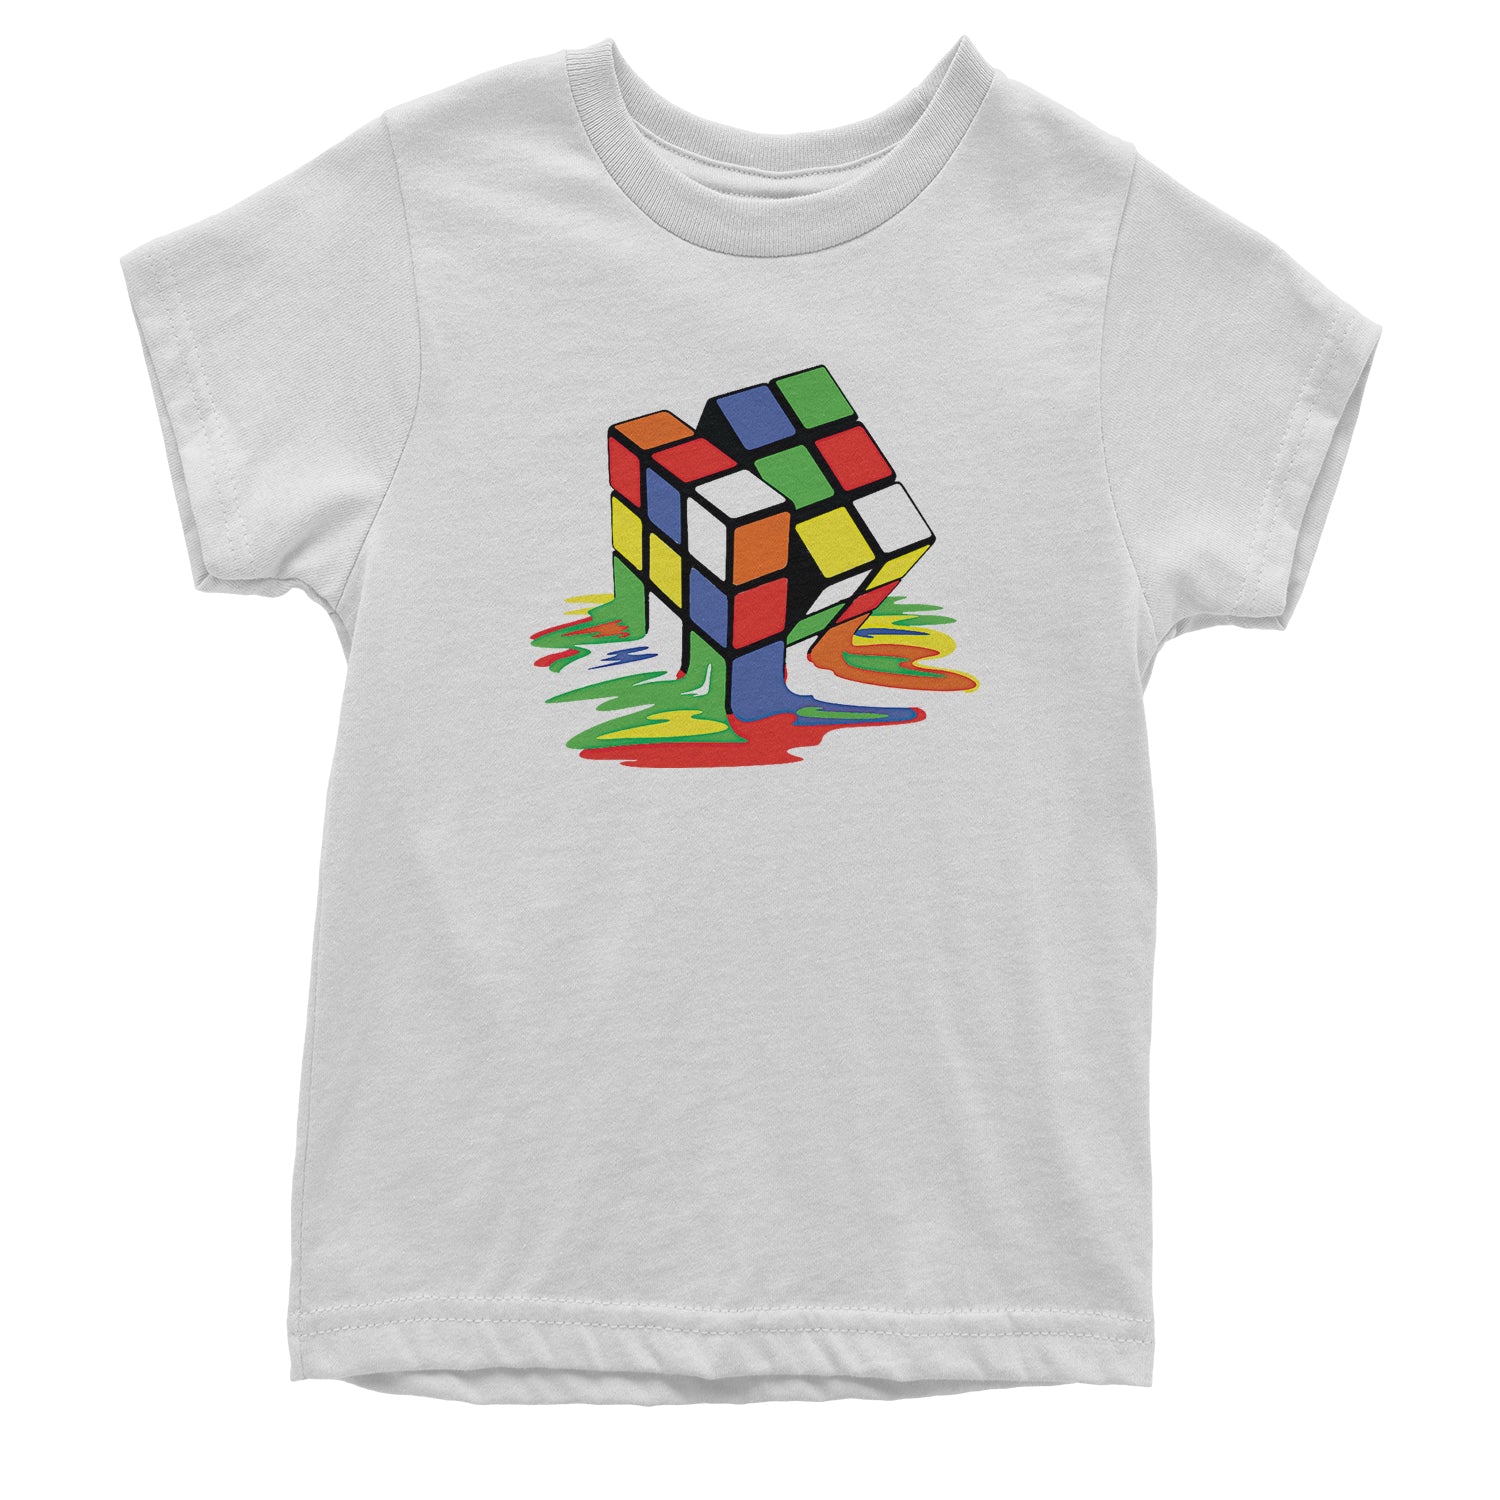 Melting Multi-Colored Cube Youth T-shirt gamer, gaming, nerd, shirt by Expression Tees